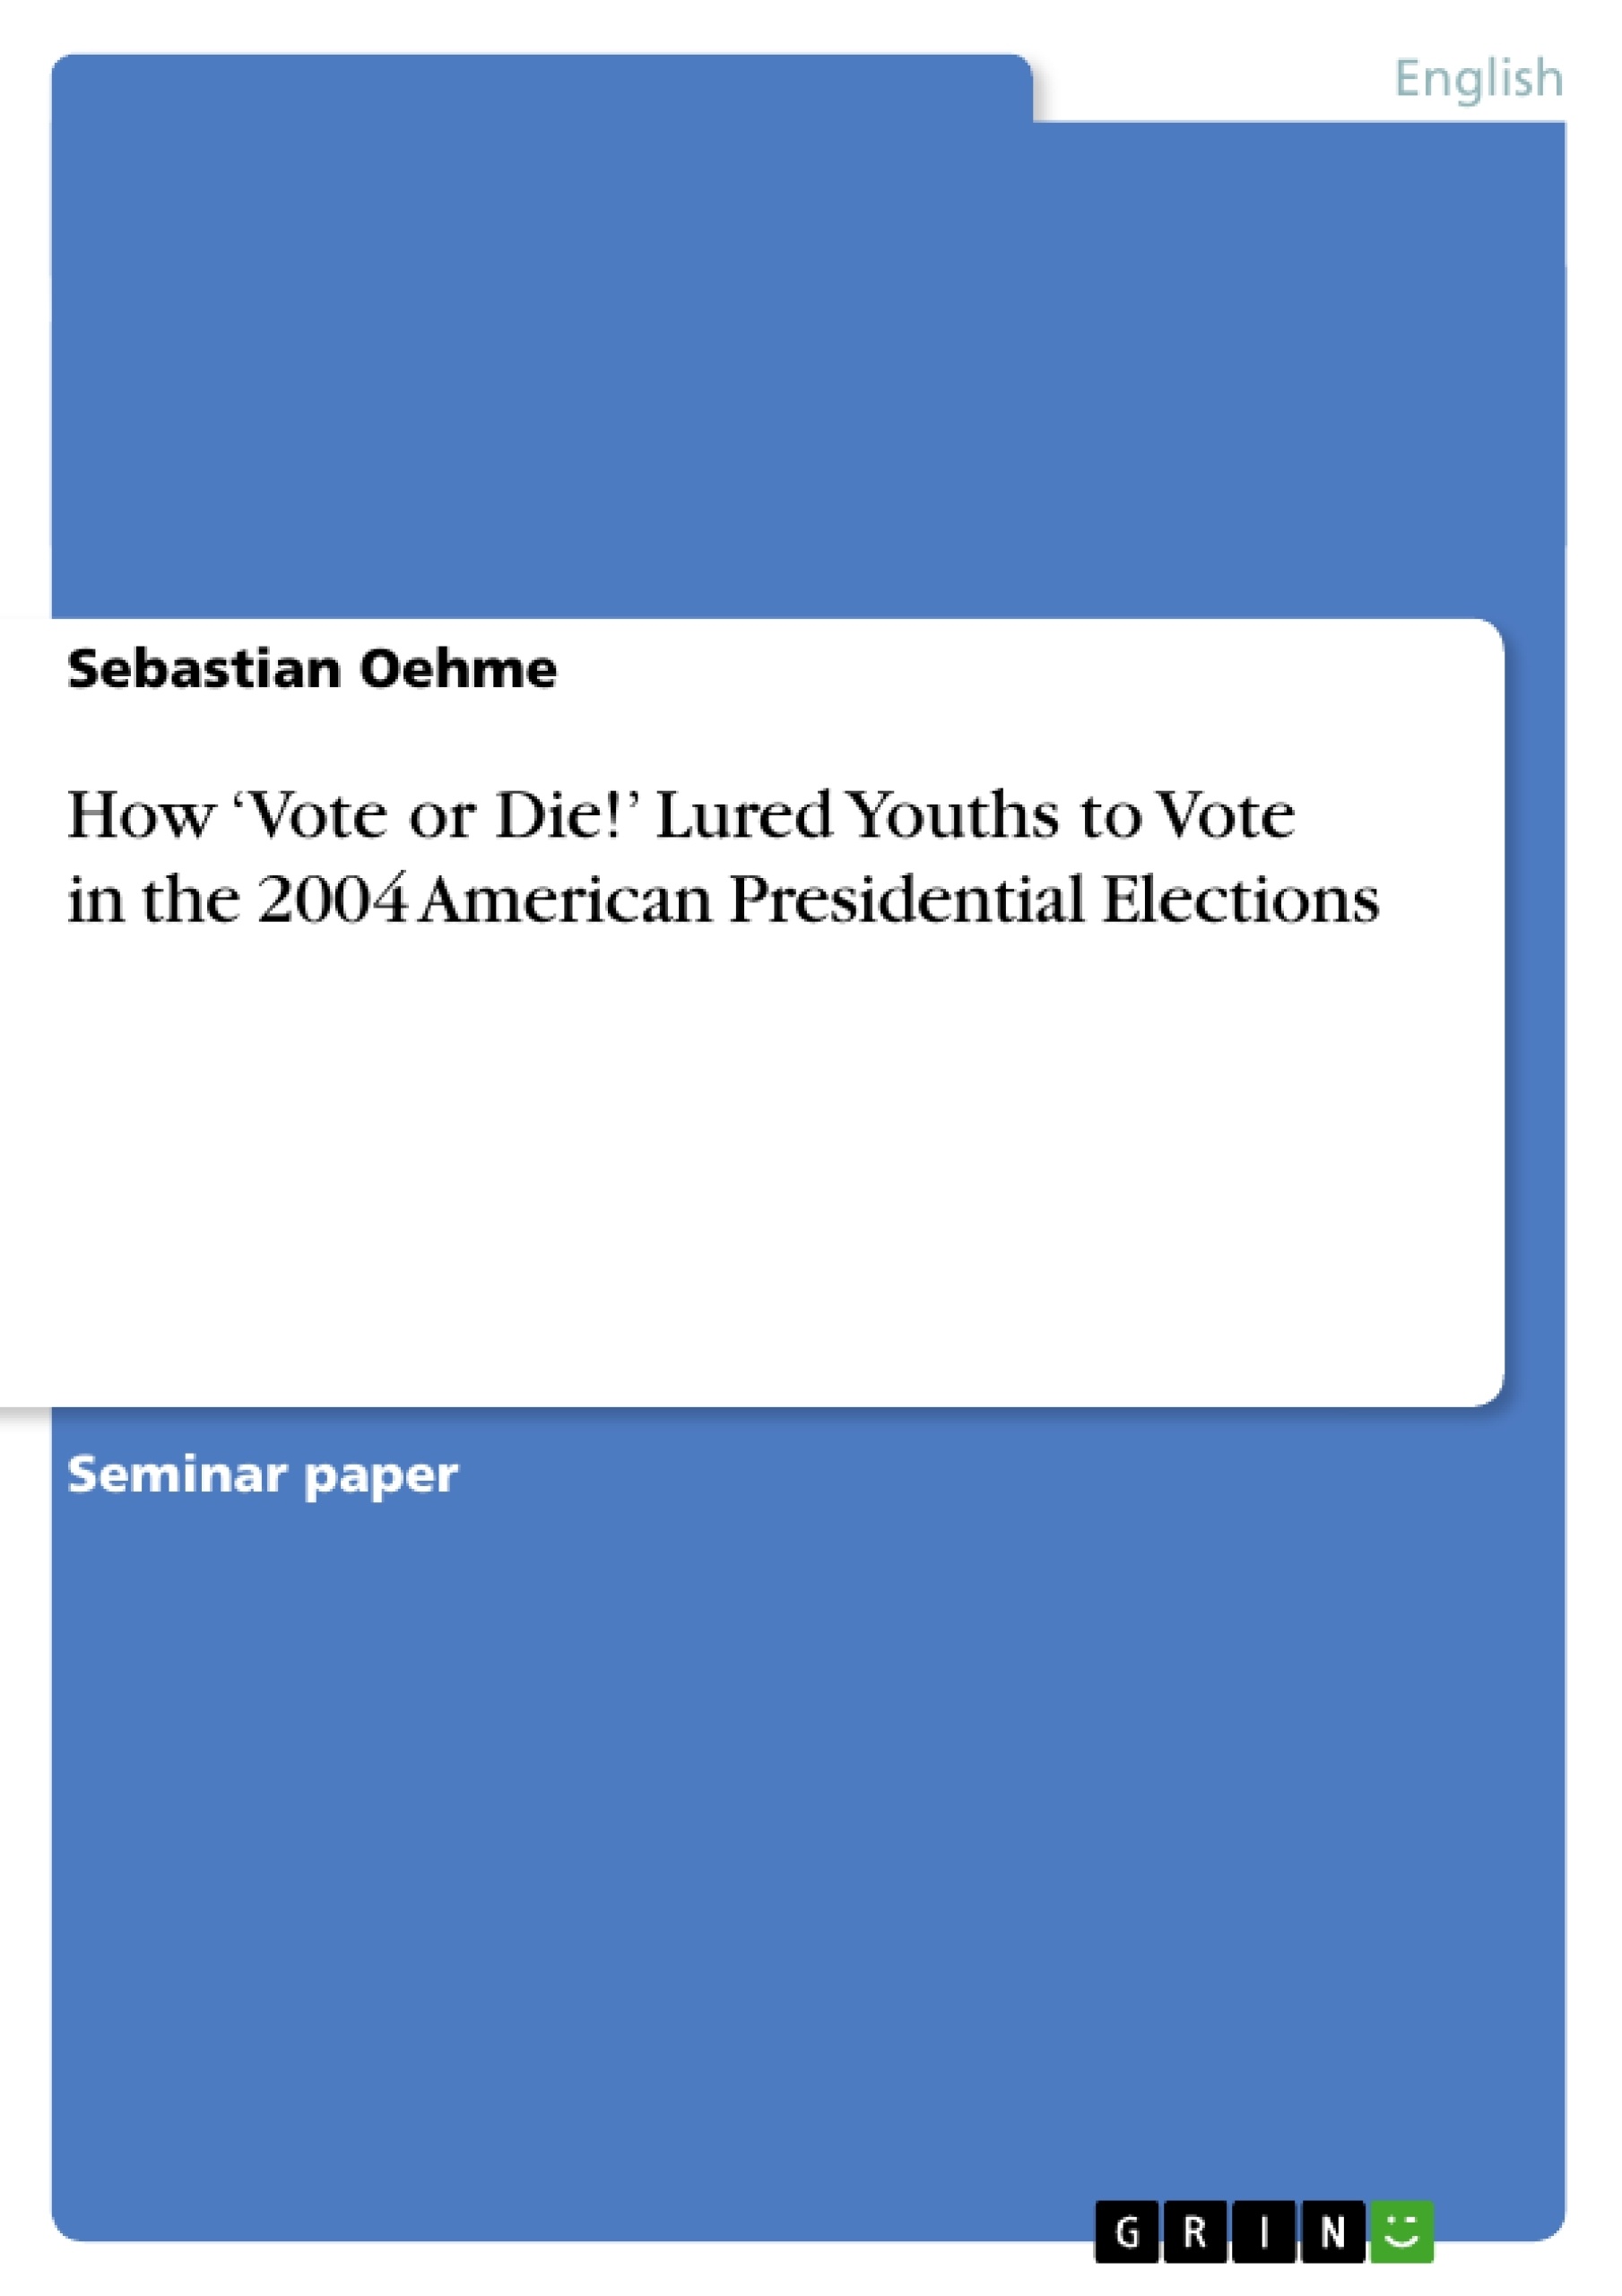 Título: How ‘Vote or Die!’ Lured Youths to Vote in the 2004 American Presidential Elections